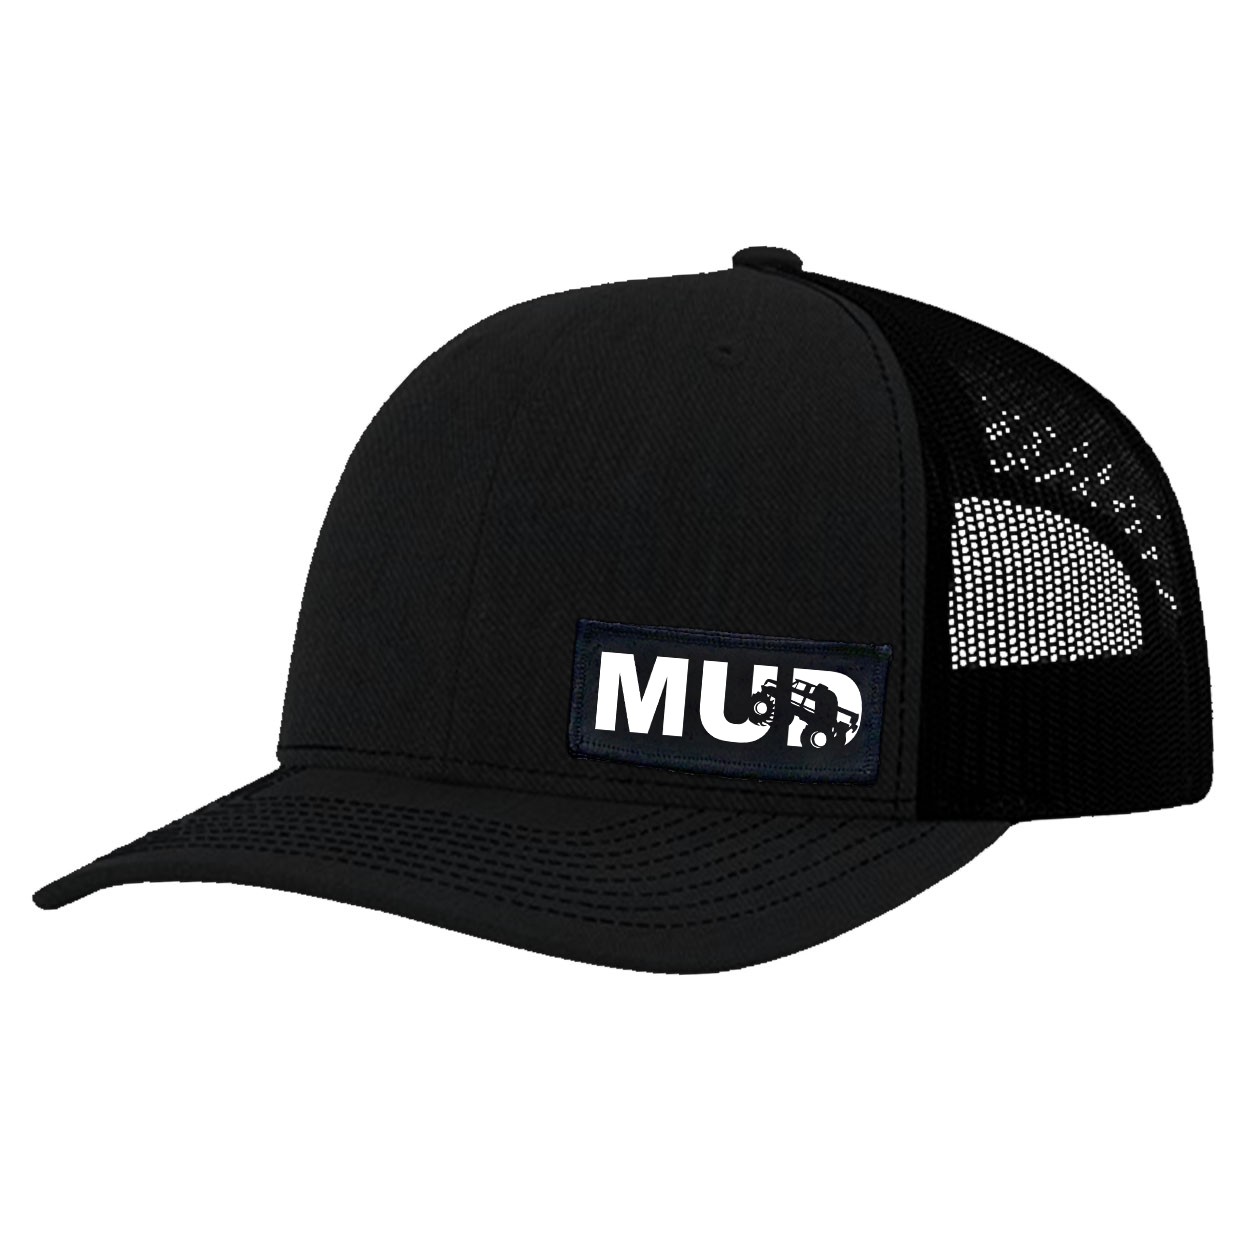 Mud Truck Logo Night Out Youth Patch Mesh Snapback Hat Black (White Logo)